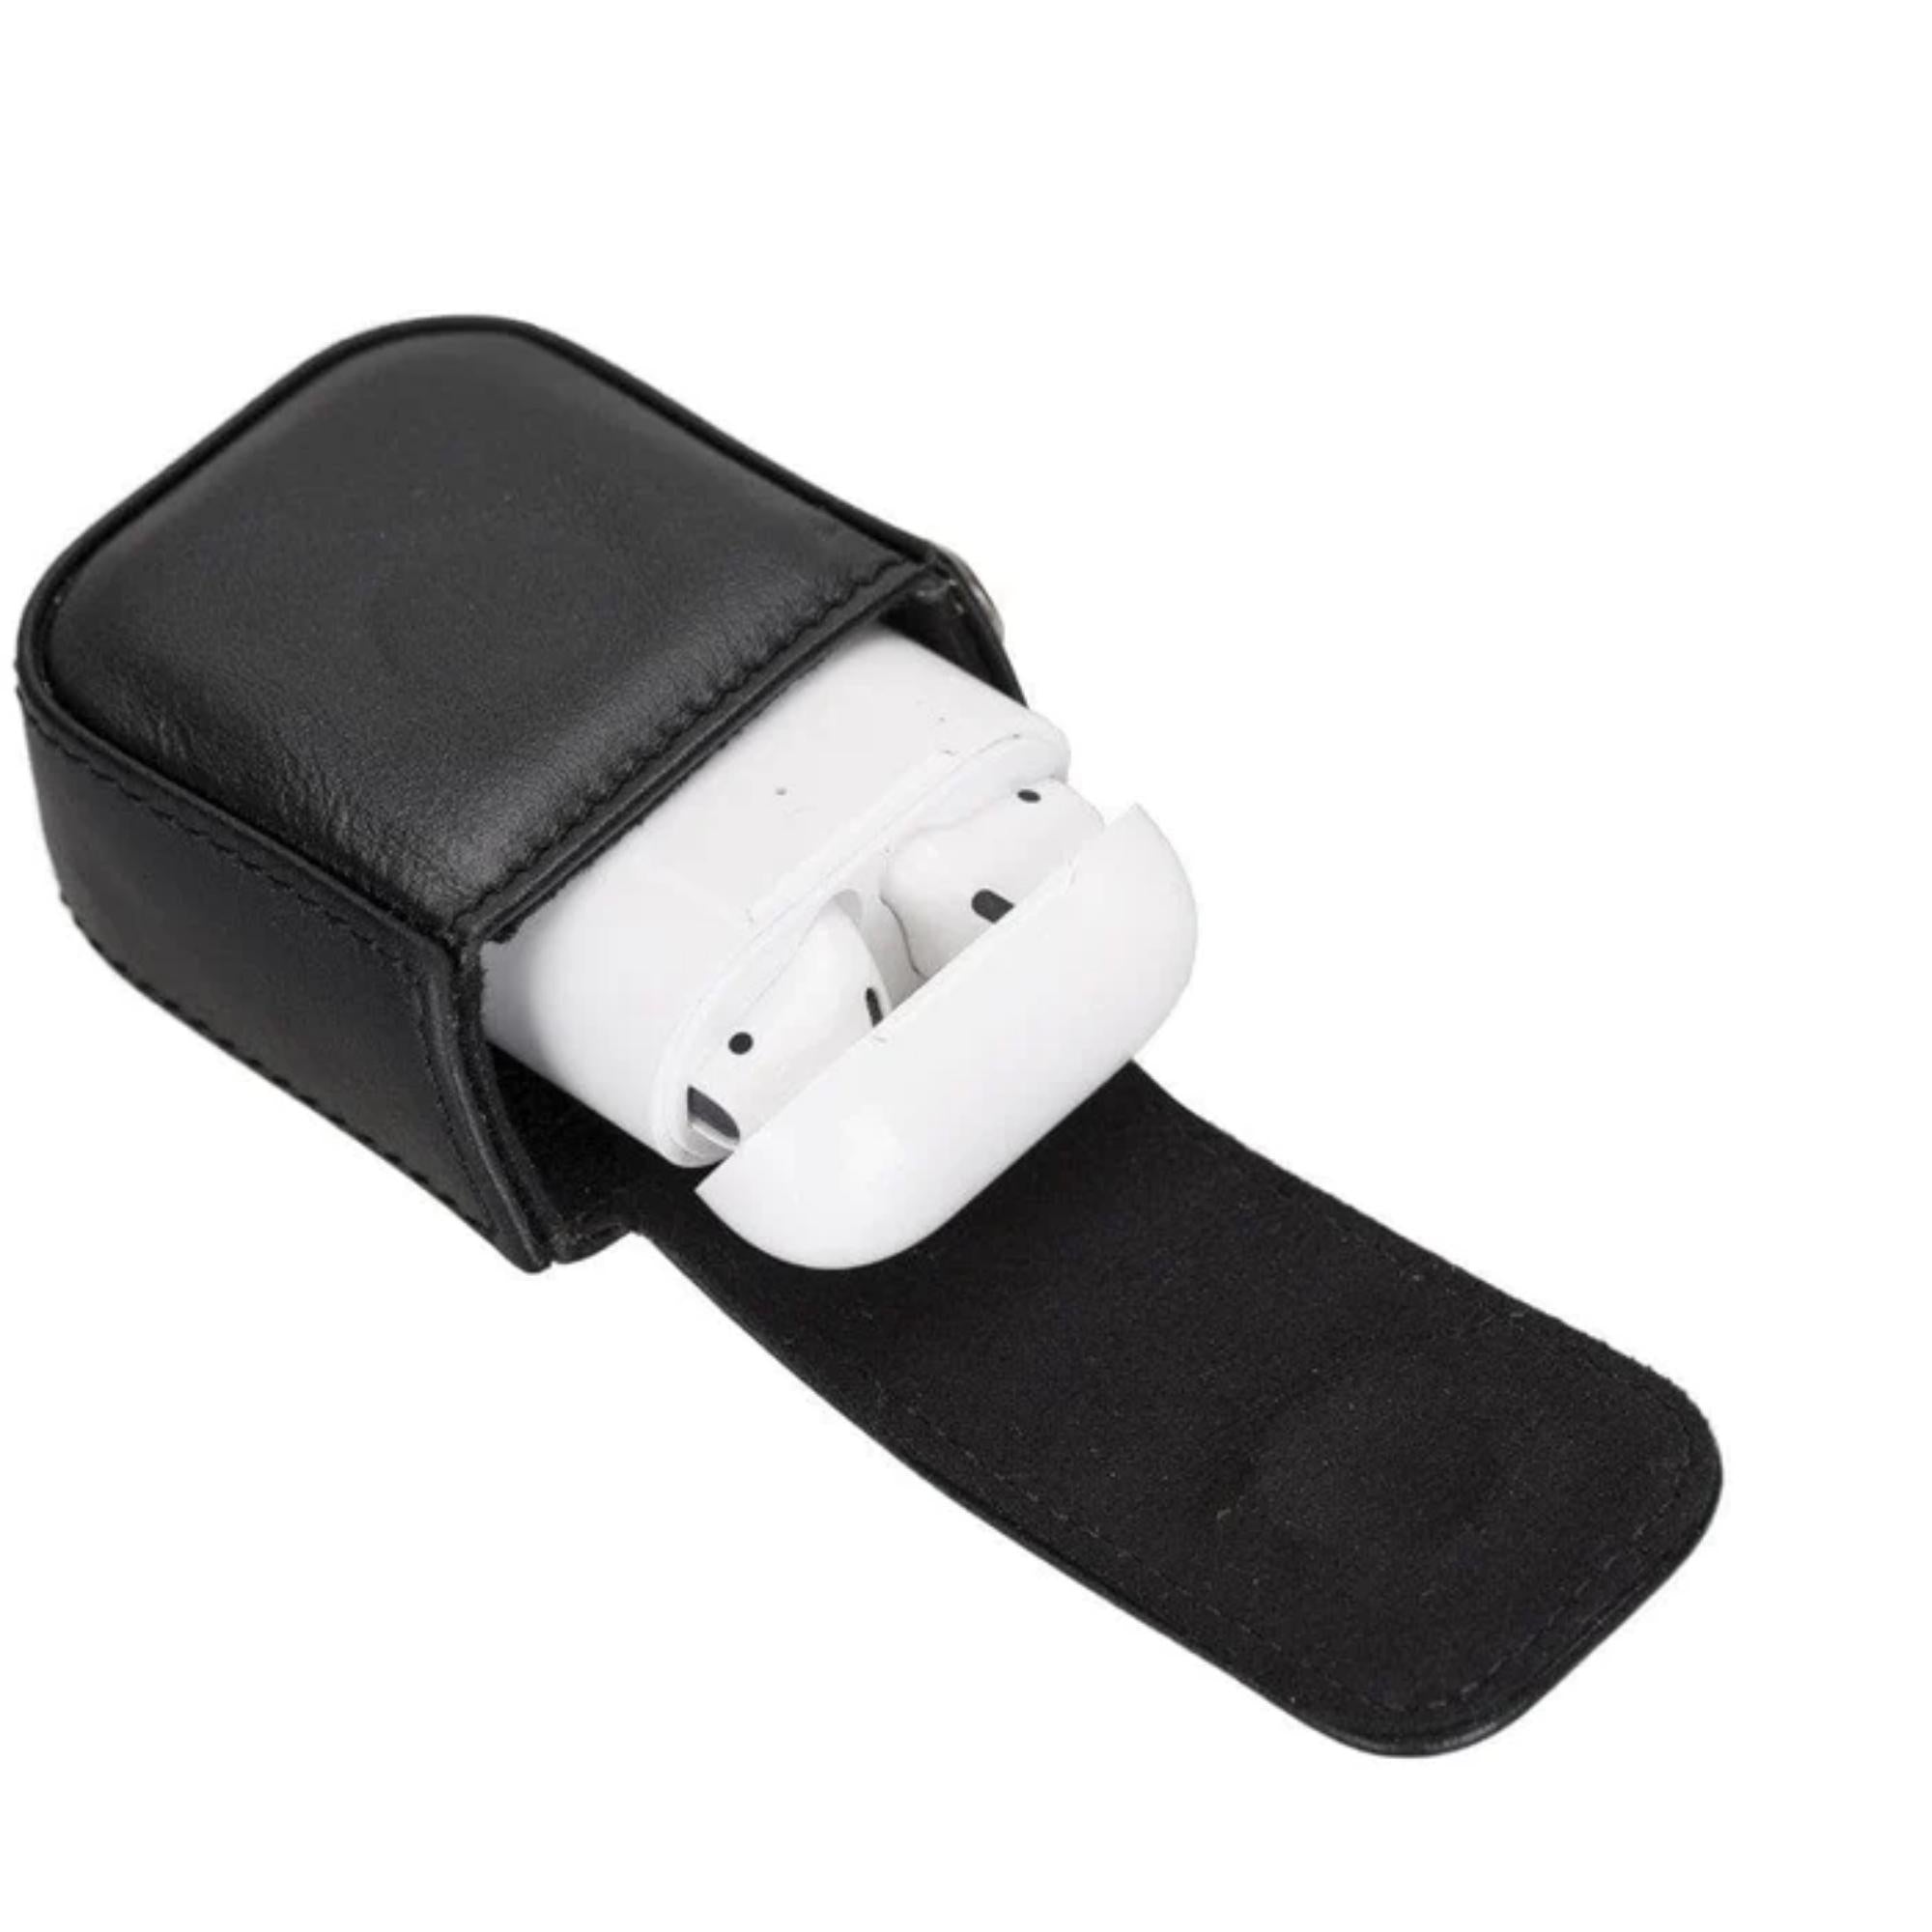 Aurora Luxury Leather AirPods Case with Attached Wrist Strap-Black-AirPods 3-2-1 Generation--TORONATA